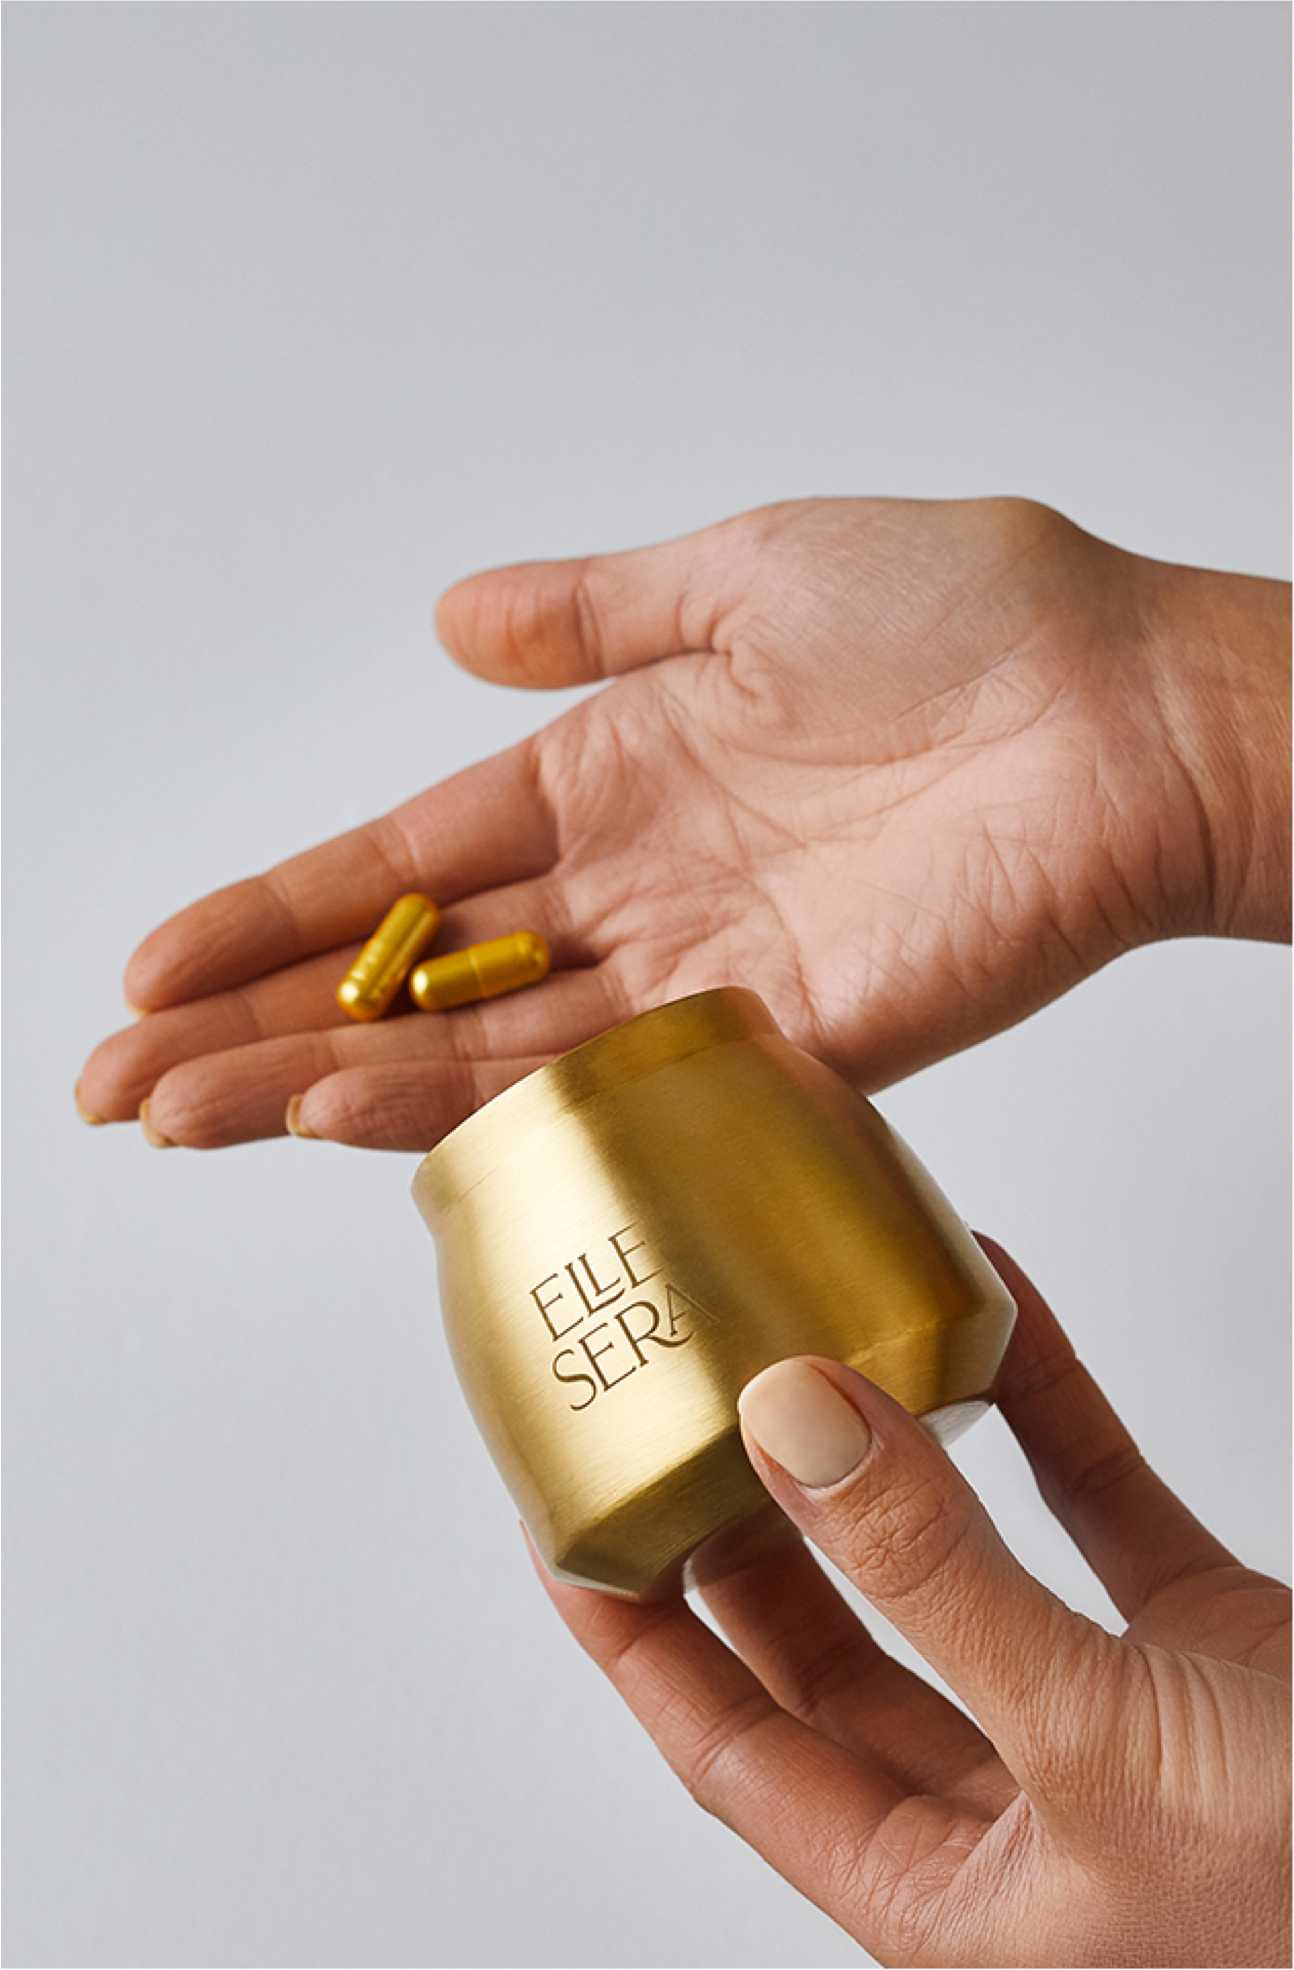 The Golden Pill (One Time Purchase)